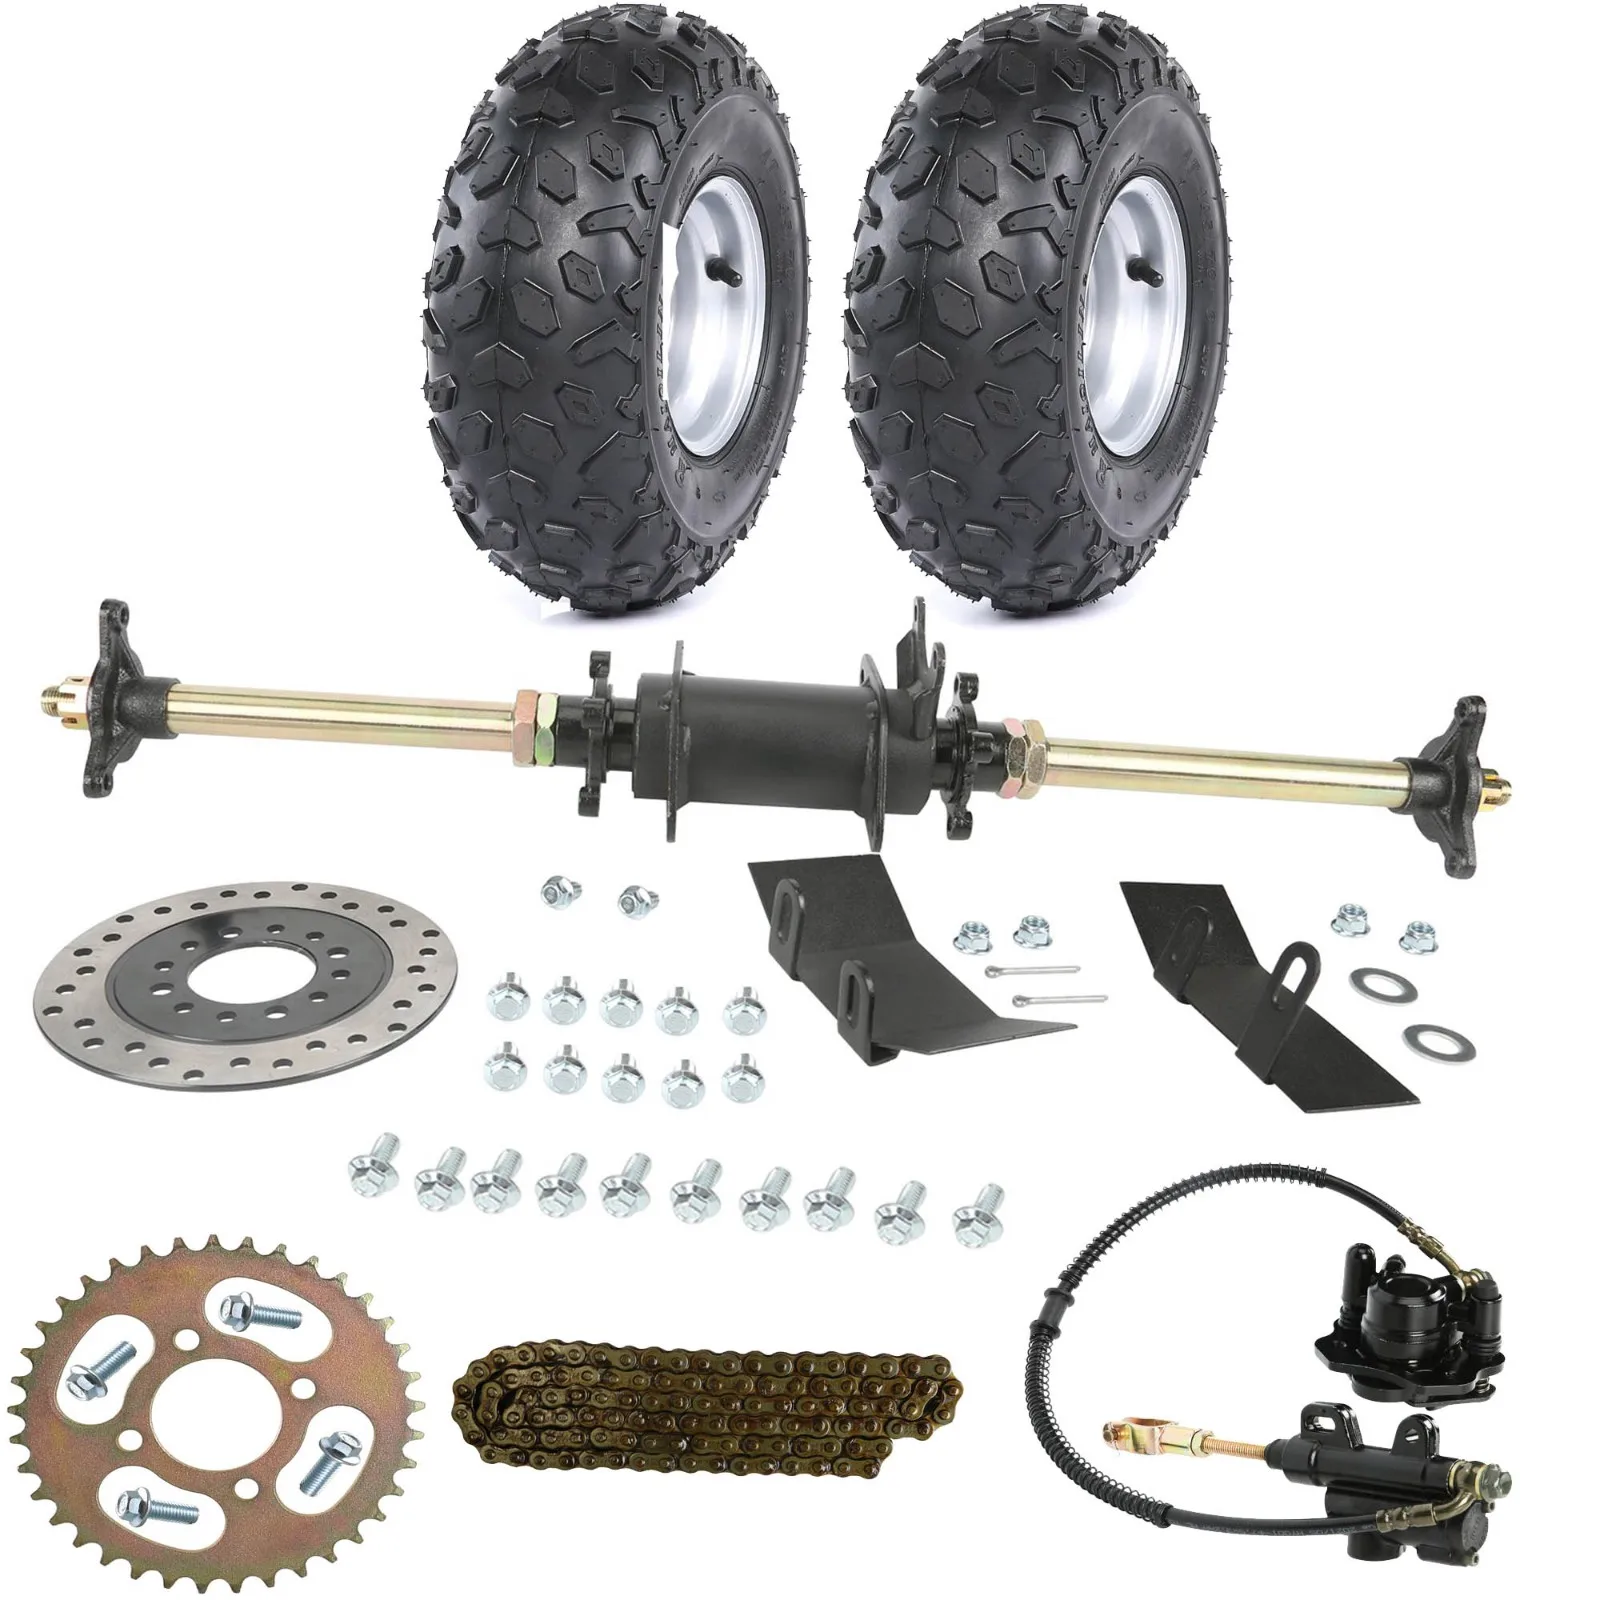 Disc Rotor Brake 28" 710mm Rear Axle Kit +2x 145/70-6 Tire with Rim Wheel for GY6 125 150 200 CRF SSR Go kart ATV